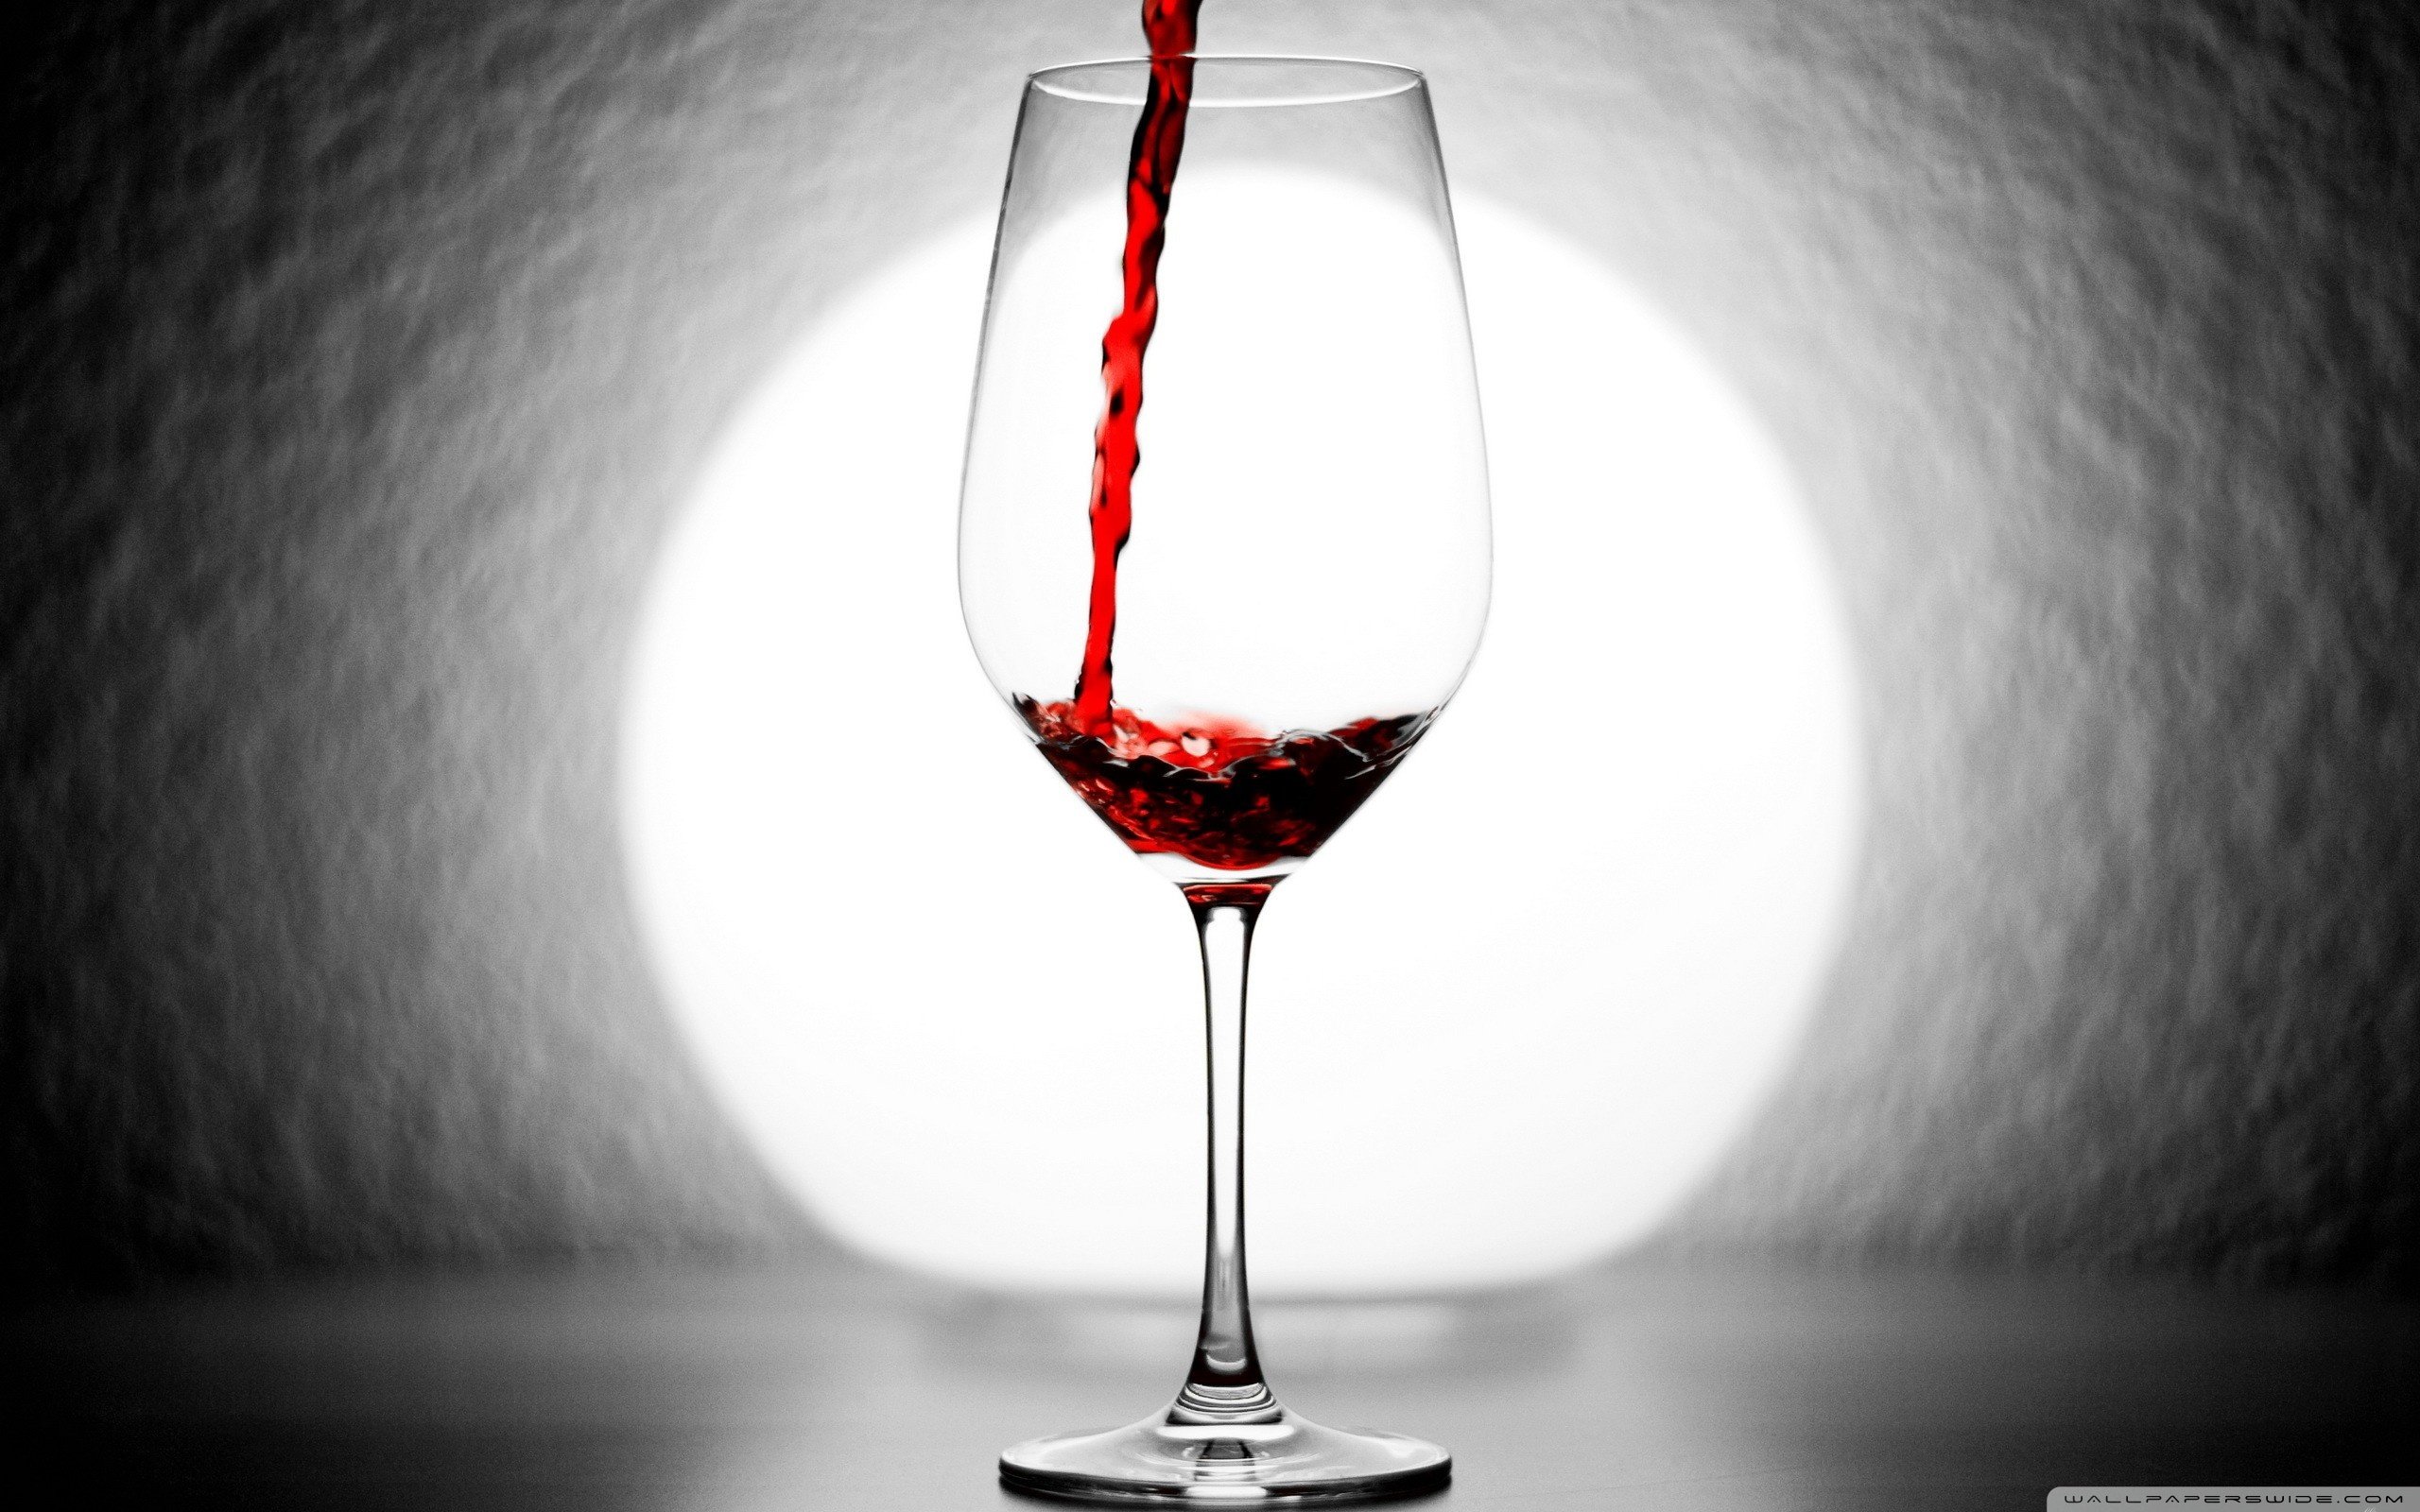 Glass of Red Wine Wallpaper   HQ Wallpapers download 100 high 2560x1600